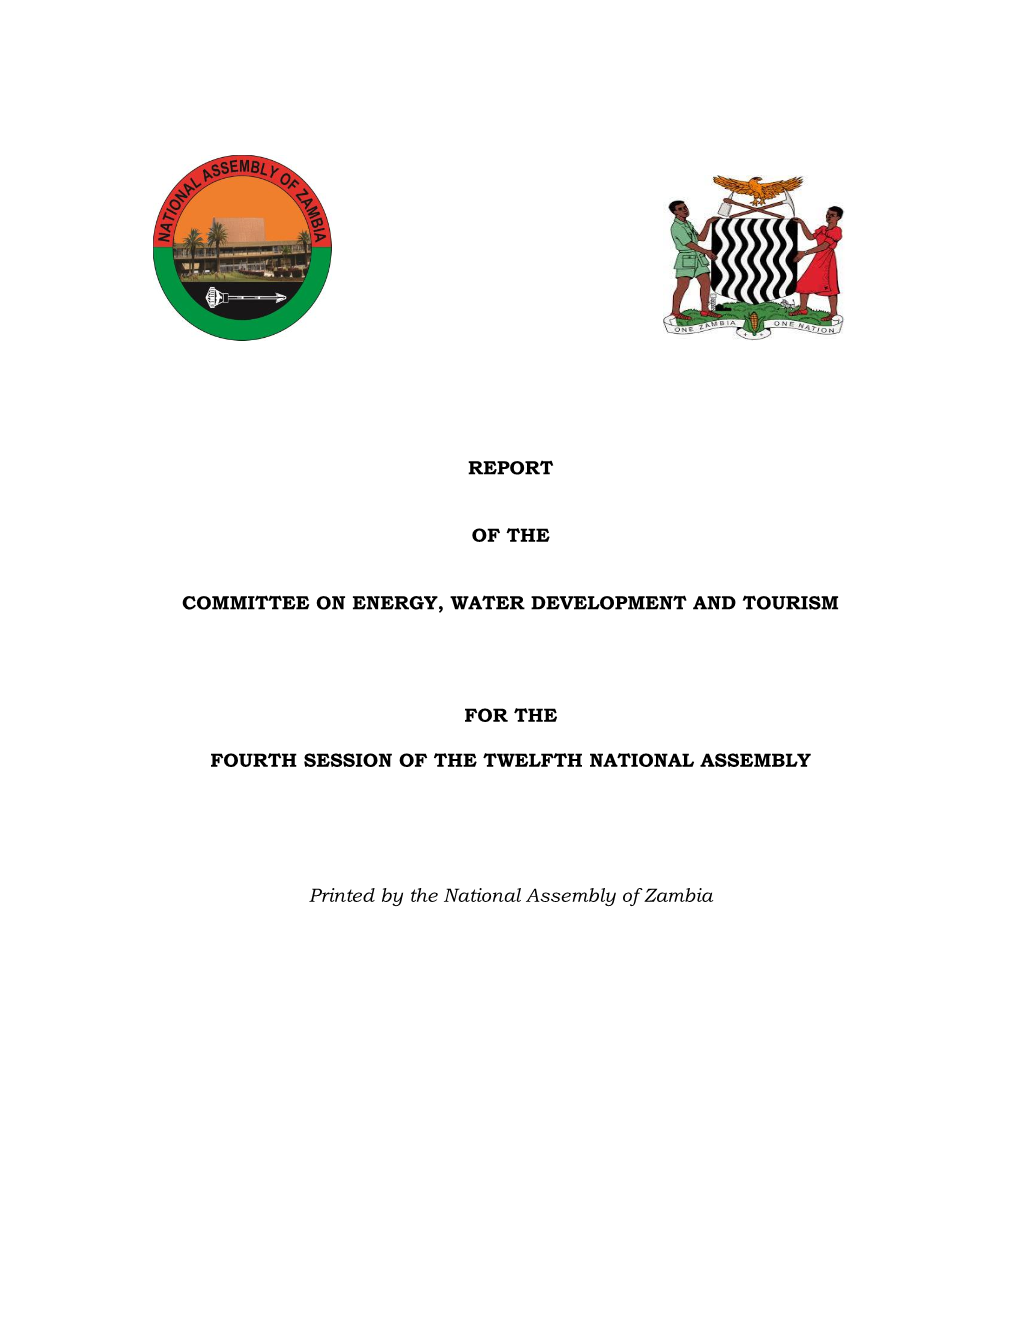 Report of the Committee on Energy, Water Development and Tourism for the Third Session of the Twelfth National Assembly